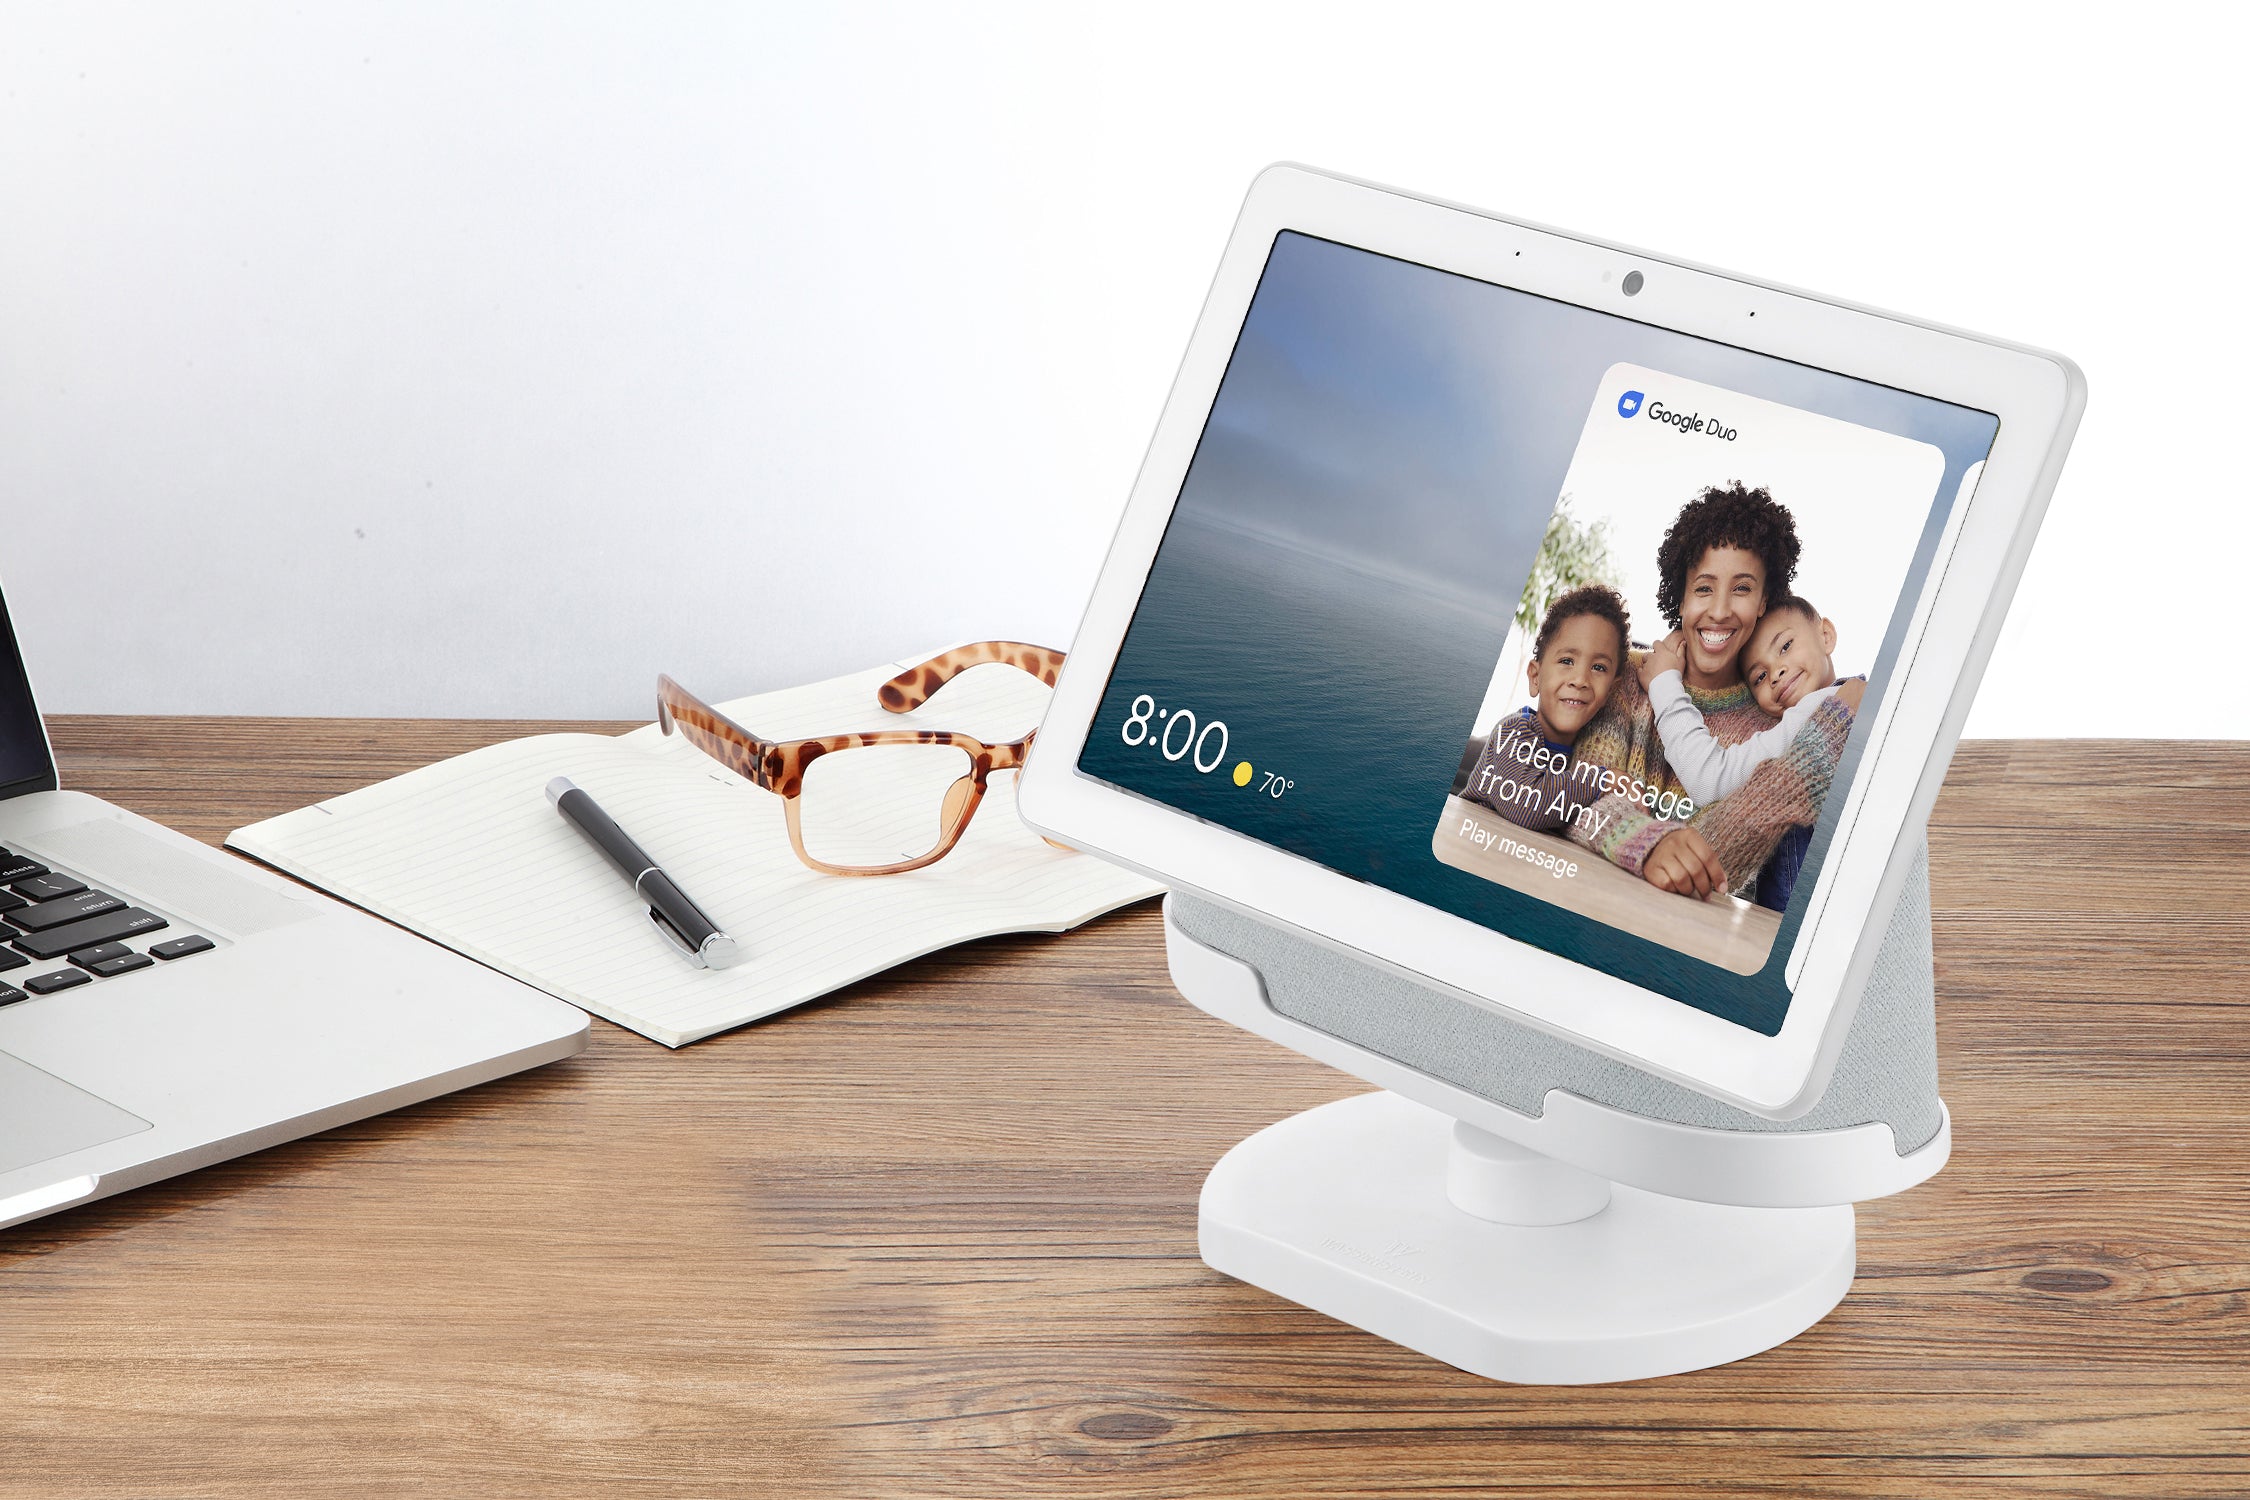 Official Made for Google Adjustable Stand for Google Nest Hub Max 